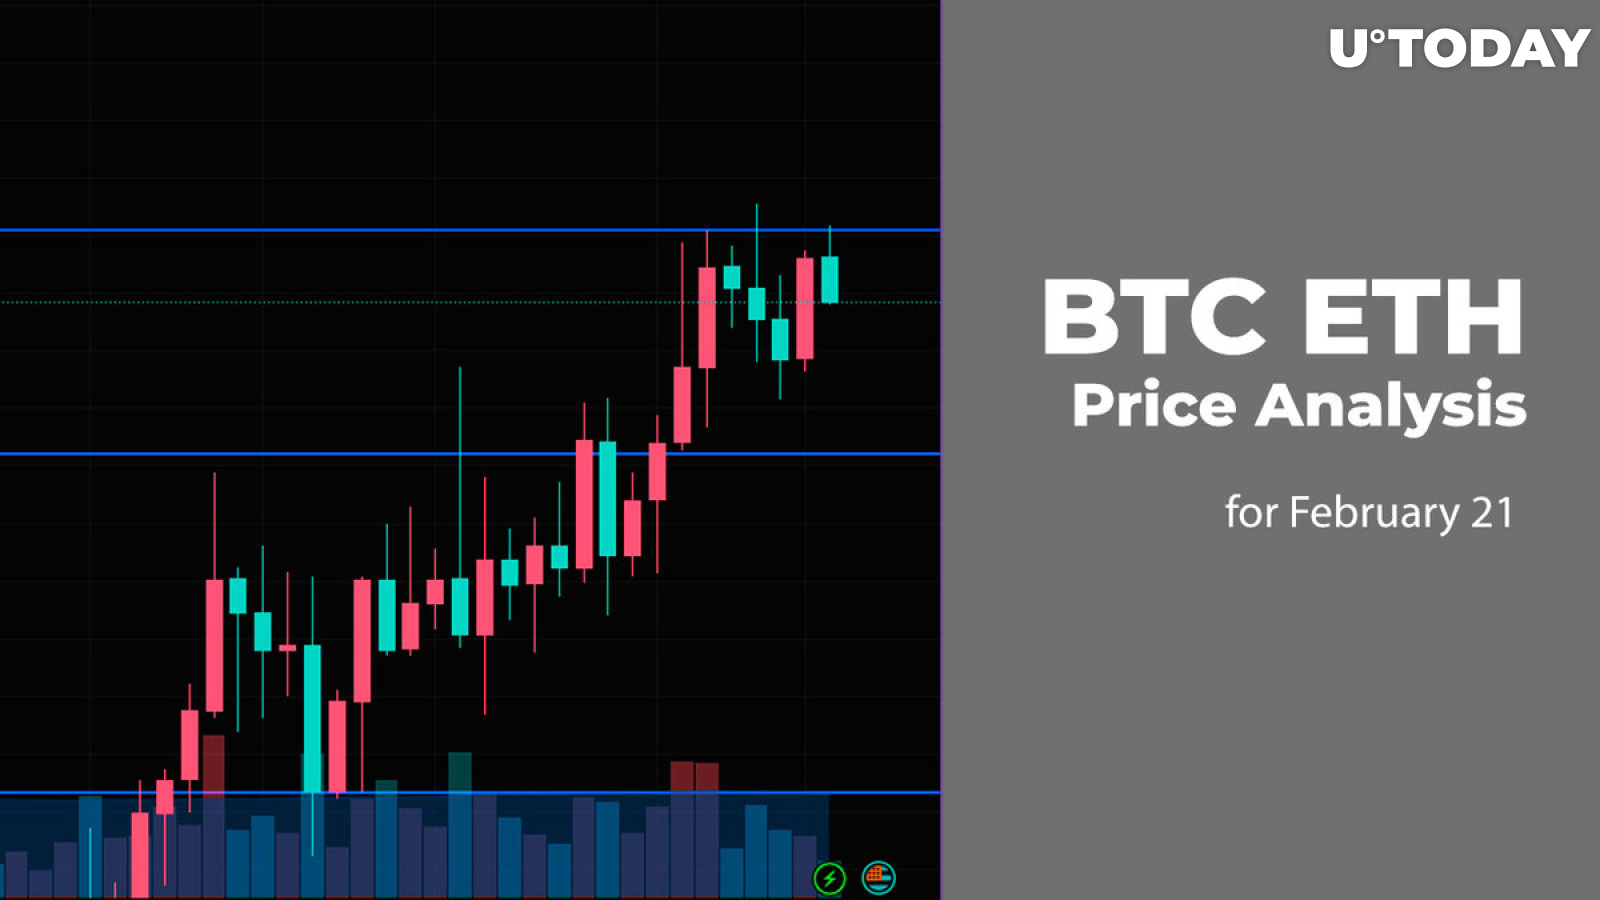 BTC and ETH Price Analysis for February 21